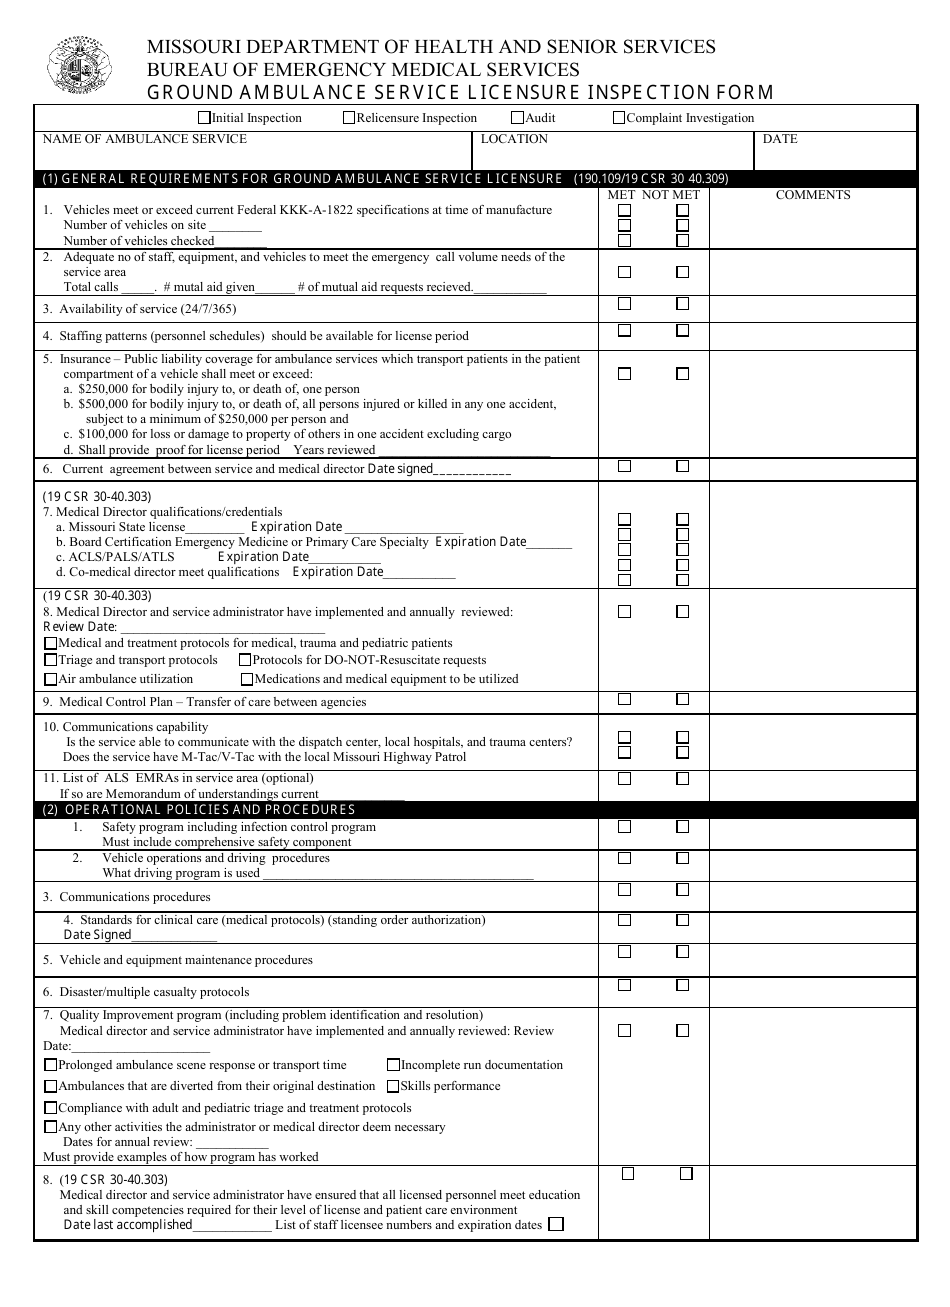 Form MO580-2314 Ground Ambulance Service Licensure Inspection Form - Missouri, Page 1